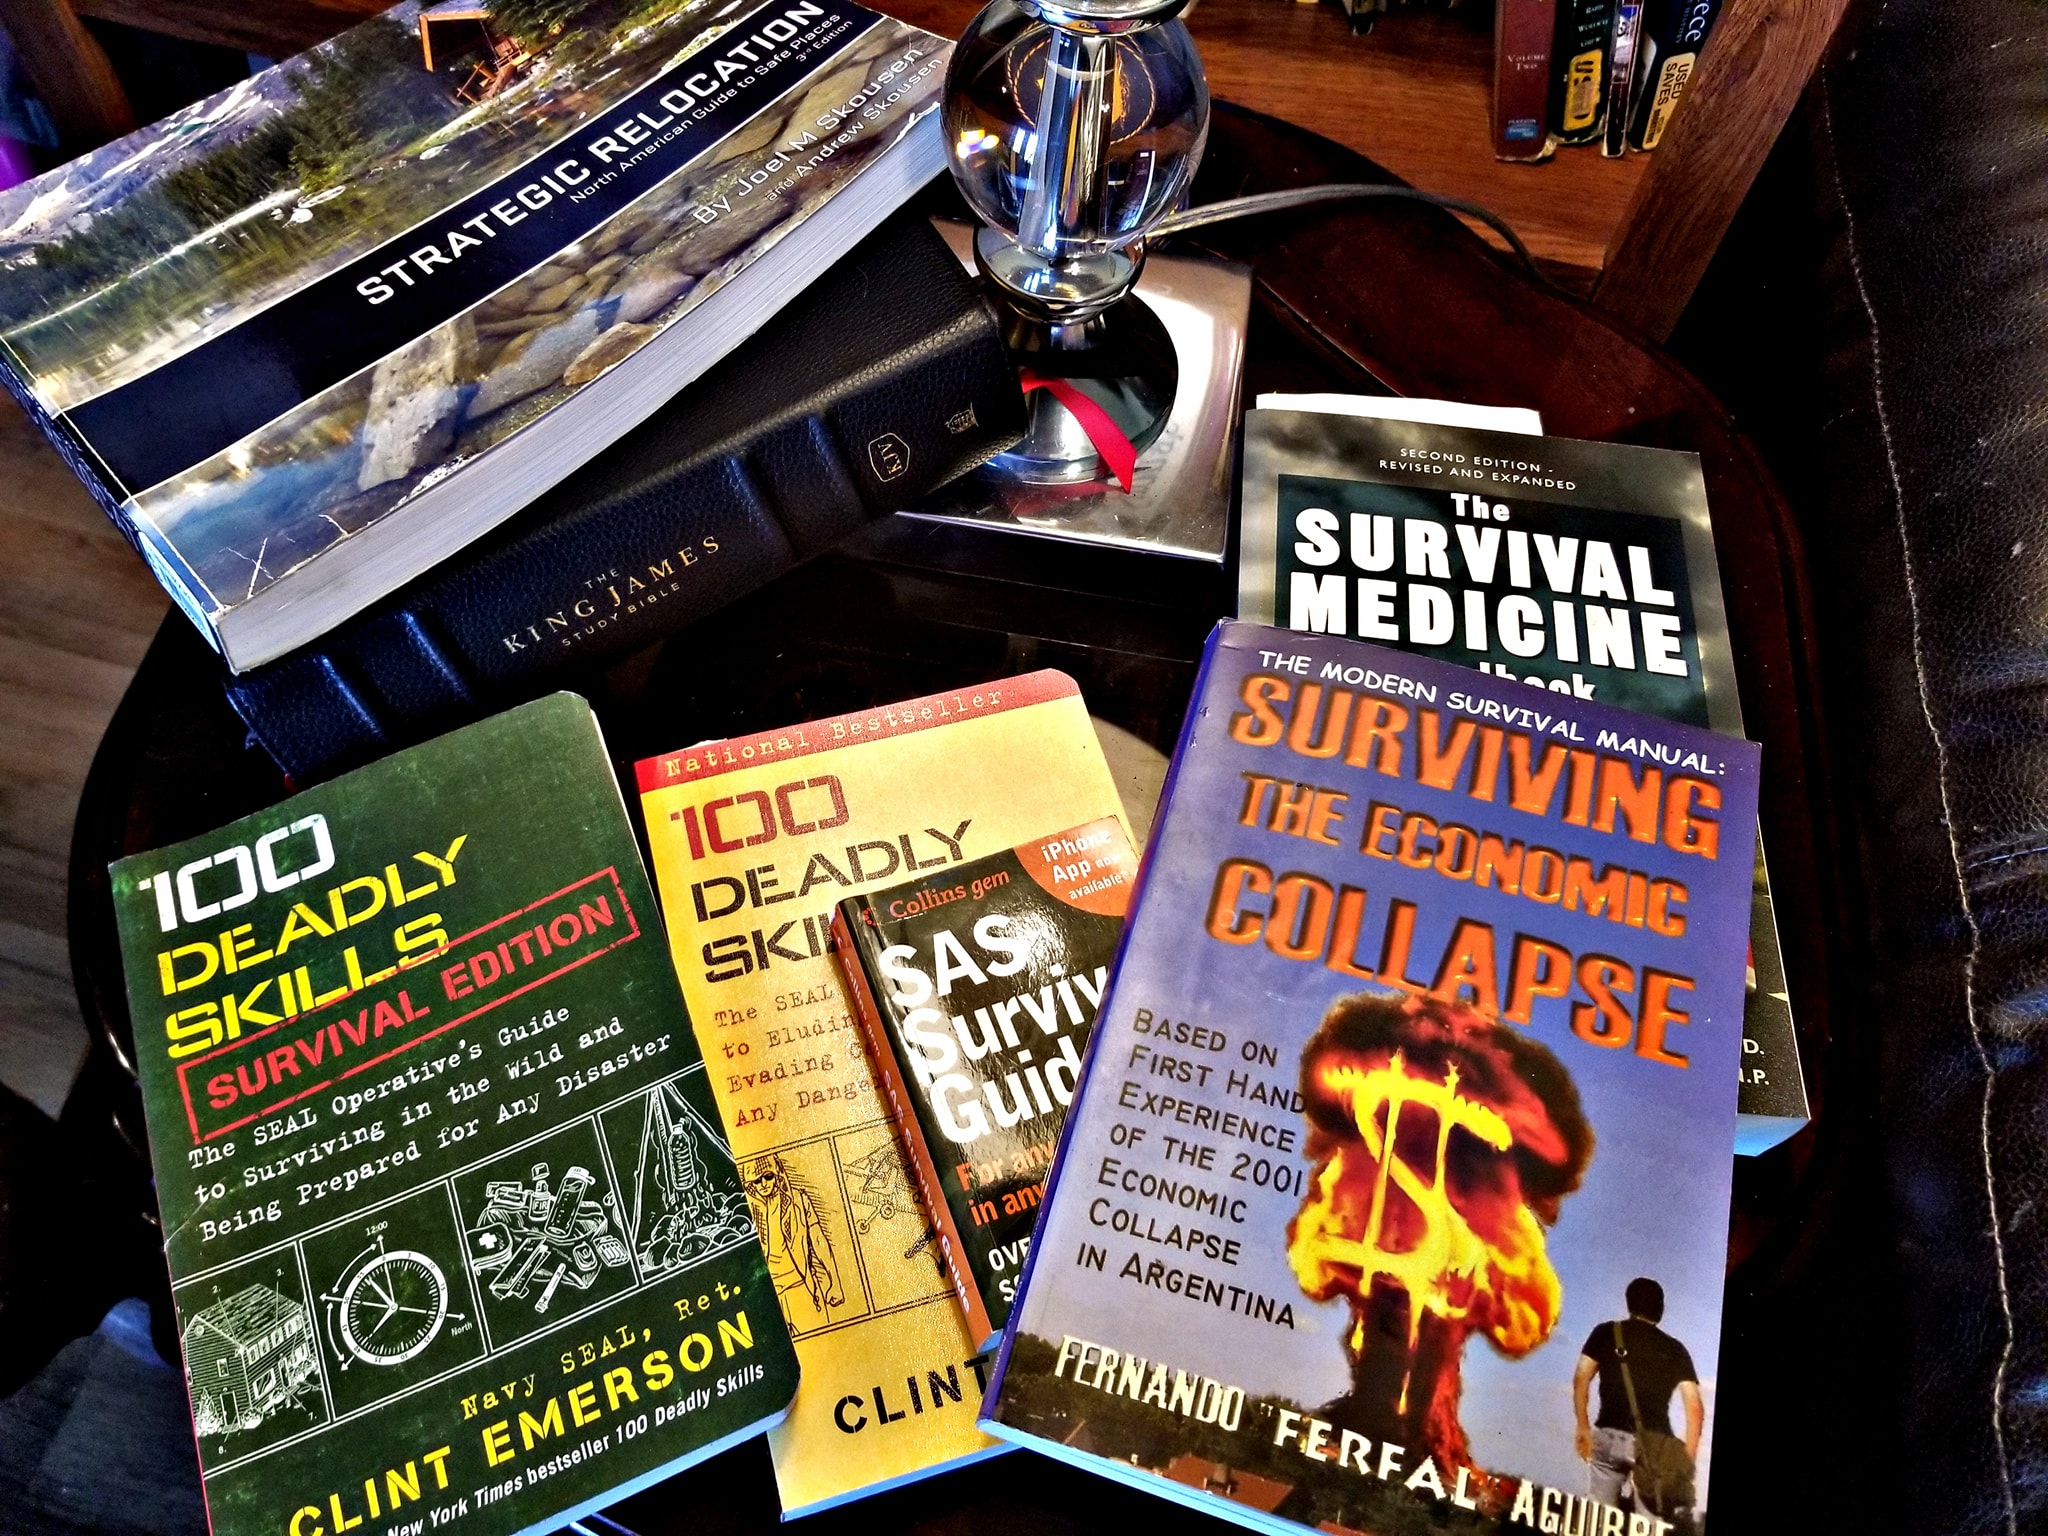 The best survival books will help you learn the skills necessary to keep you alive during difficult times.